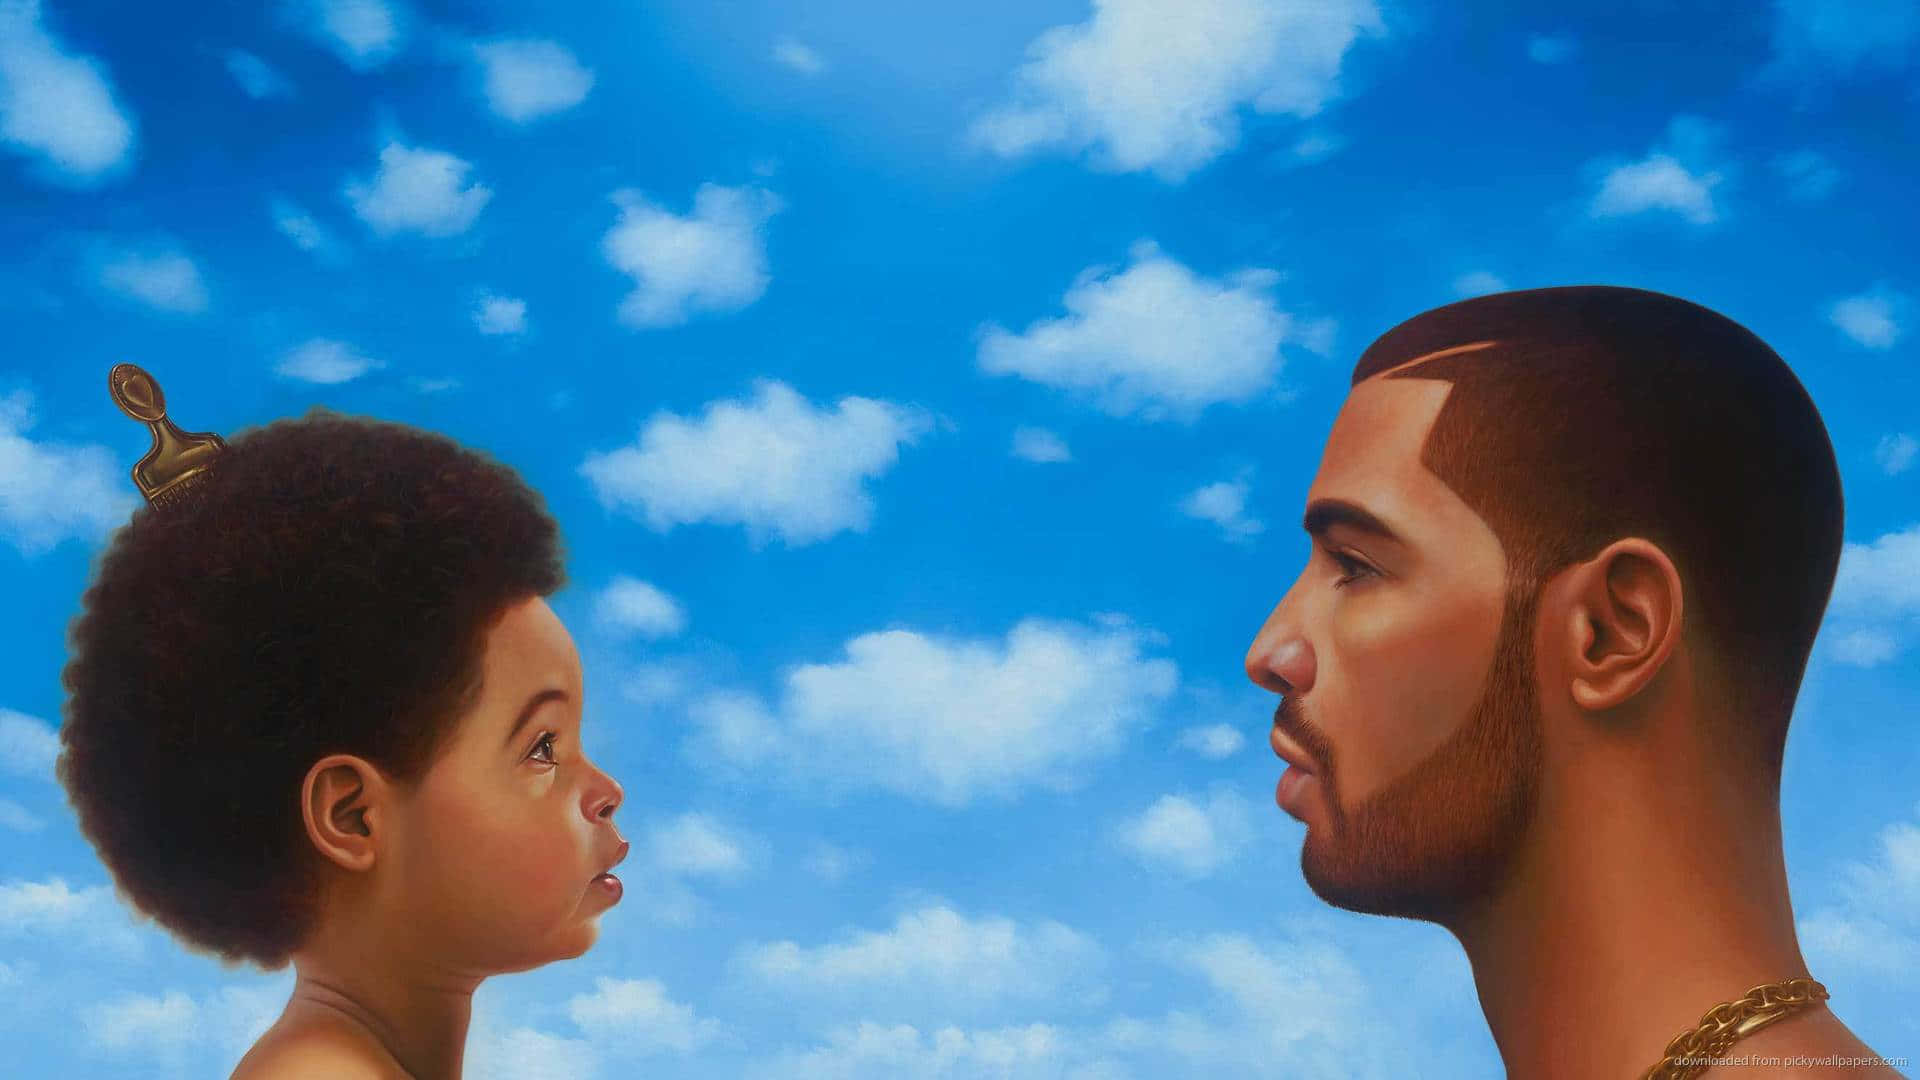 Drake looks out at the city skyline in his album artwork for "Nothing Was The Same" Wallpaper